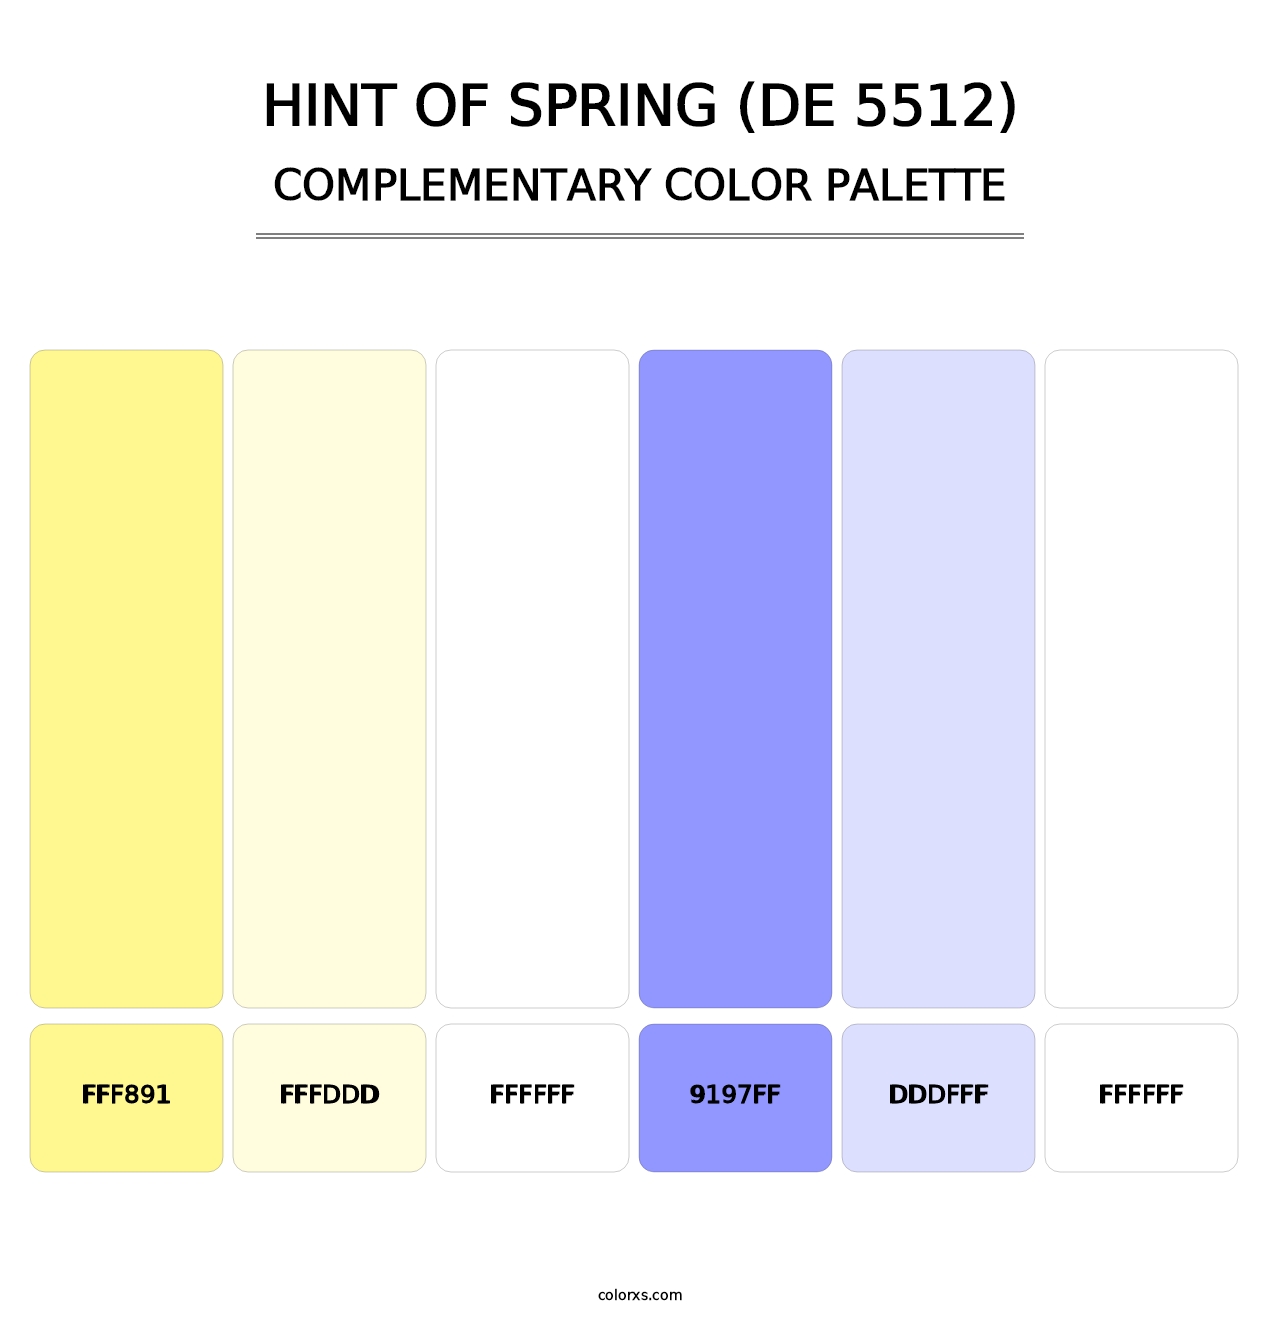 Hint of Spring (DE 5512) - Complementary Color Palette